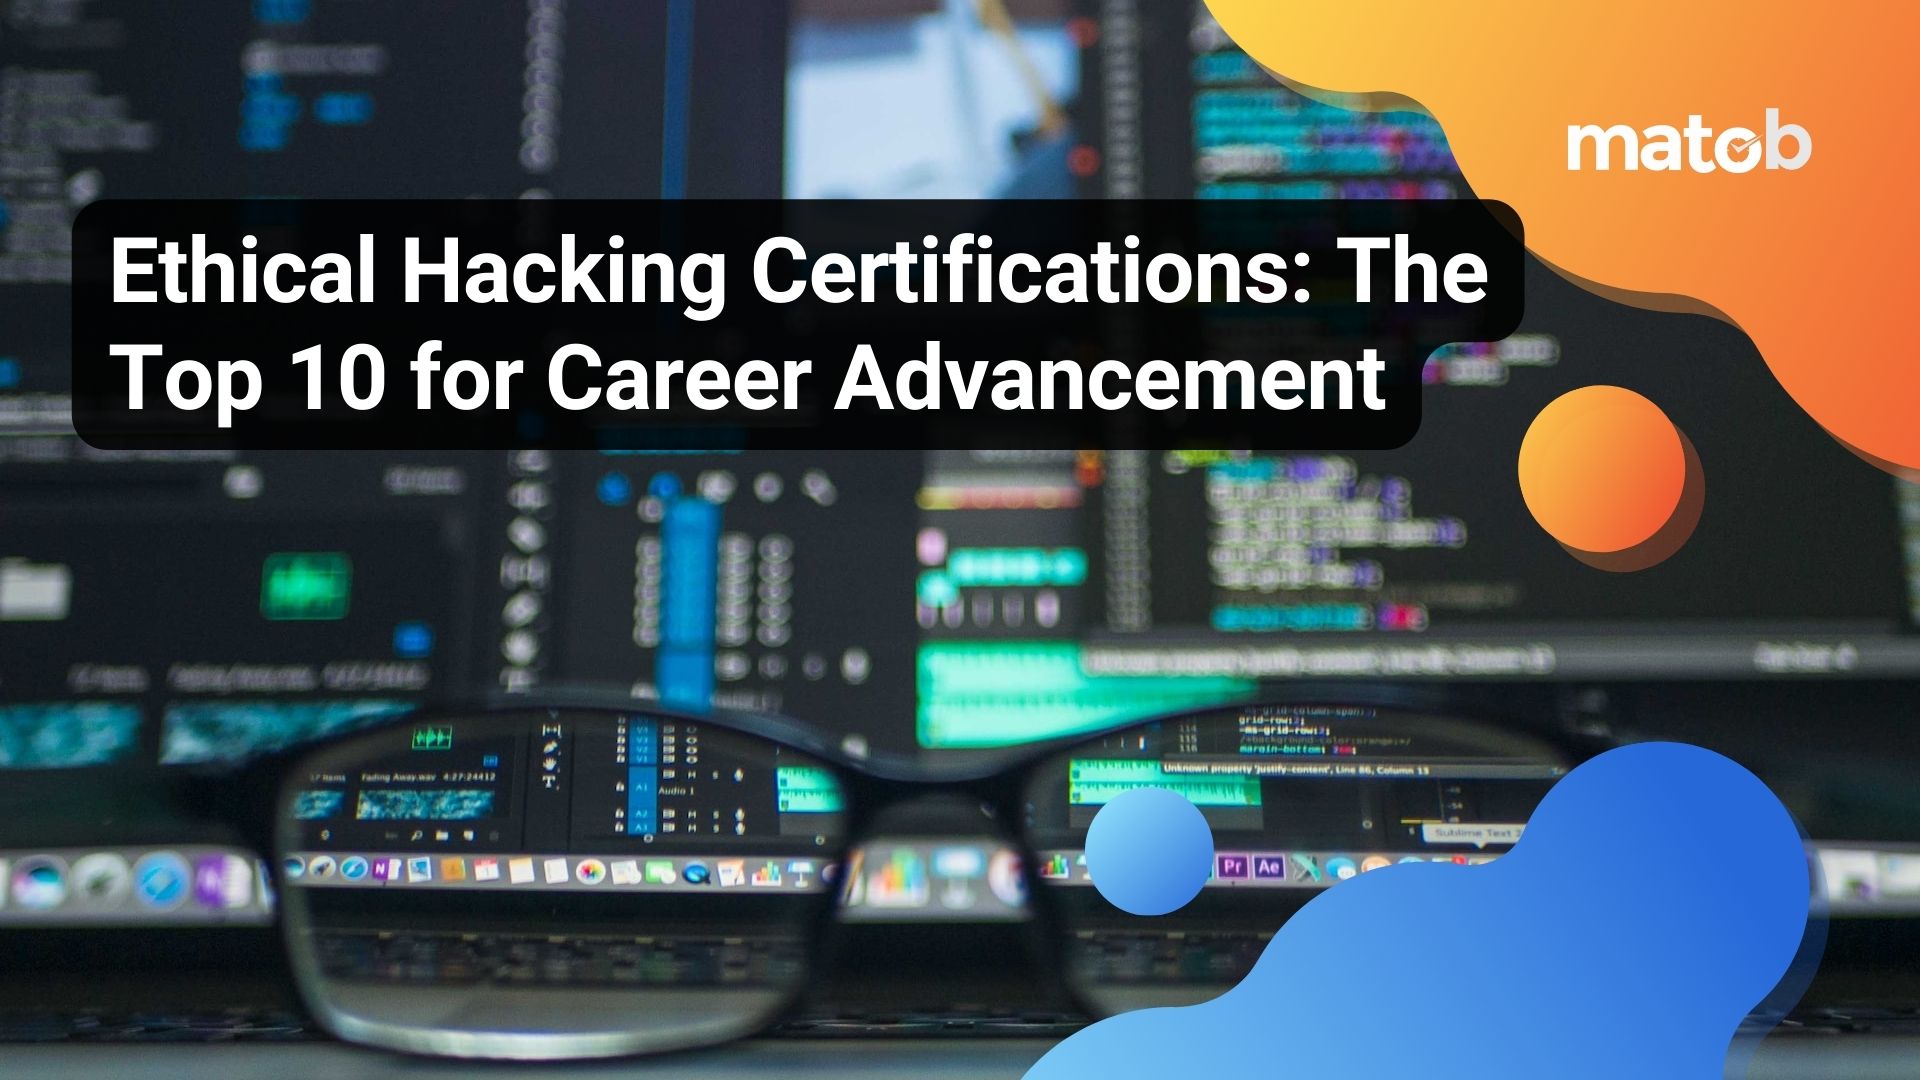 Ethical Hacking Certifications: The Top 10 for Career Advancement